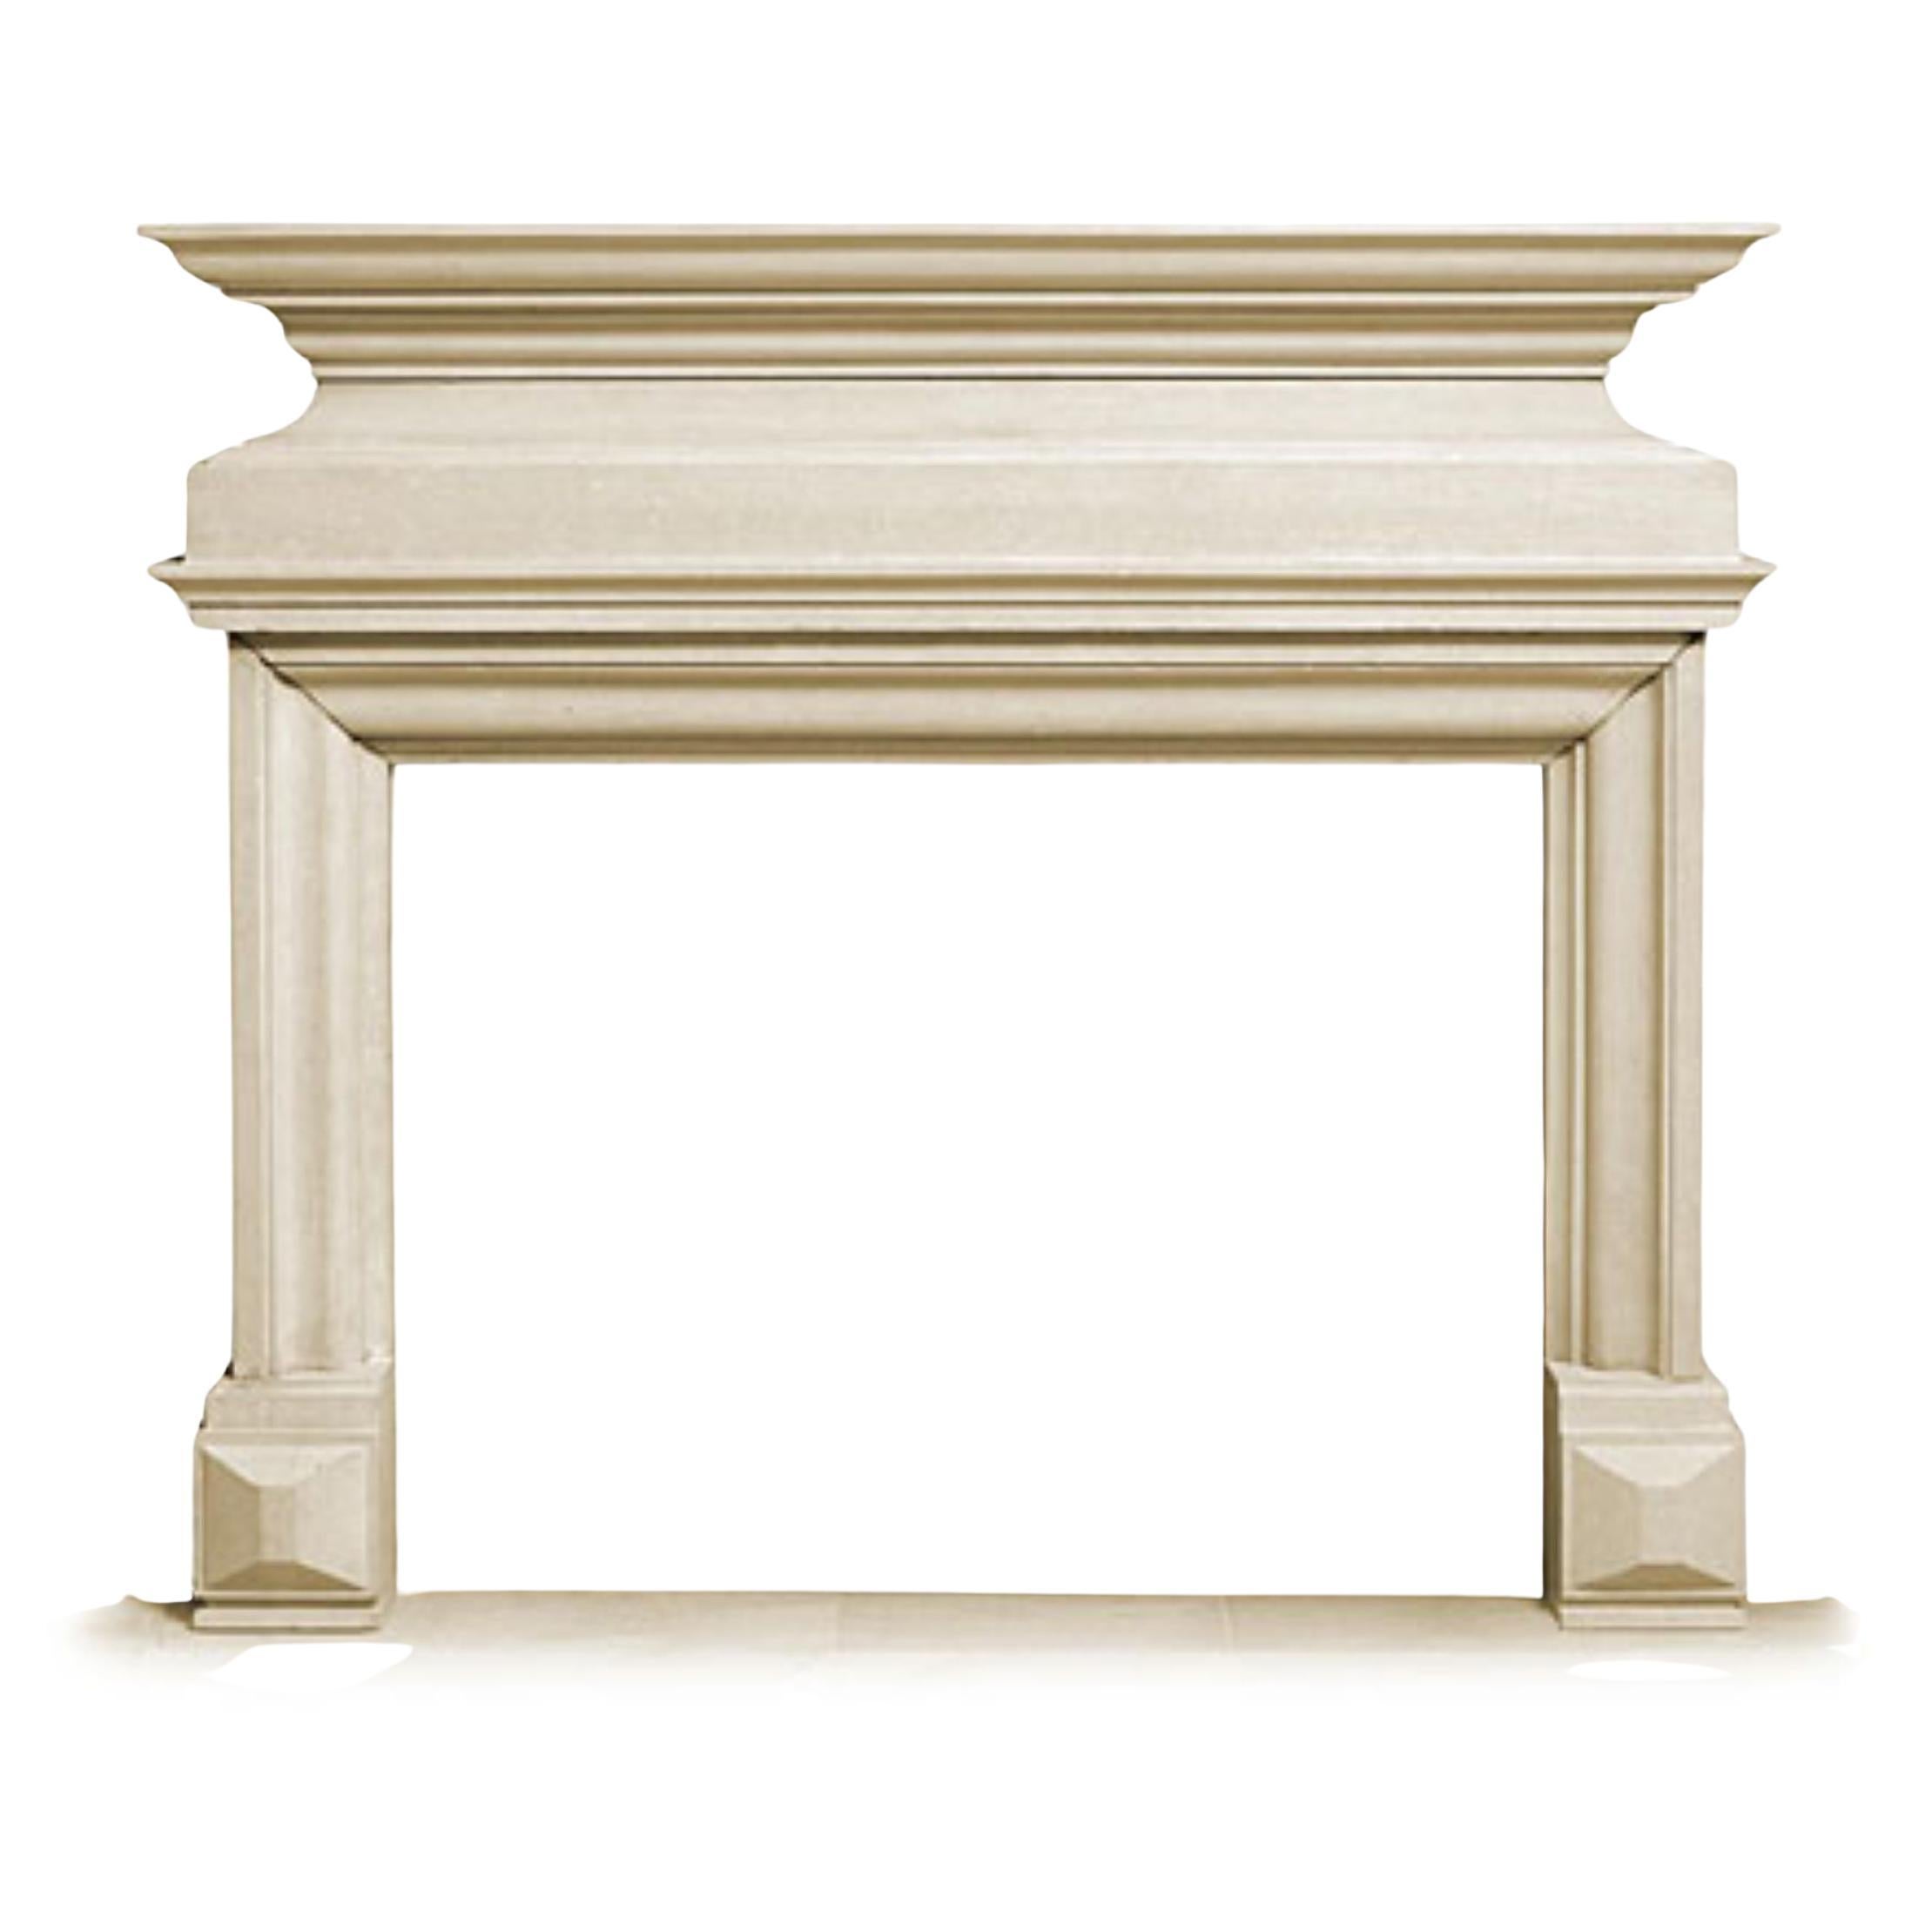 The Louis XIII: A Classical Stone Fireplace in the Style of the Louis XIII Era